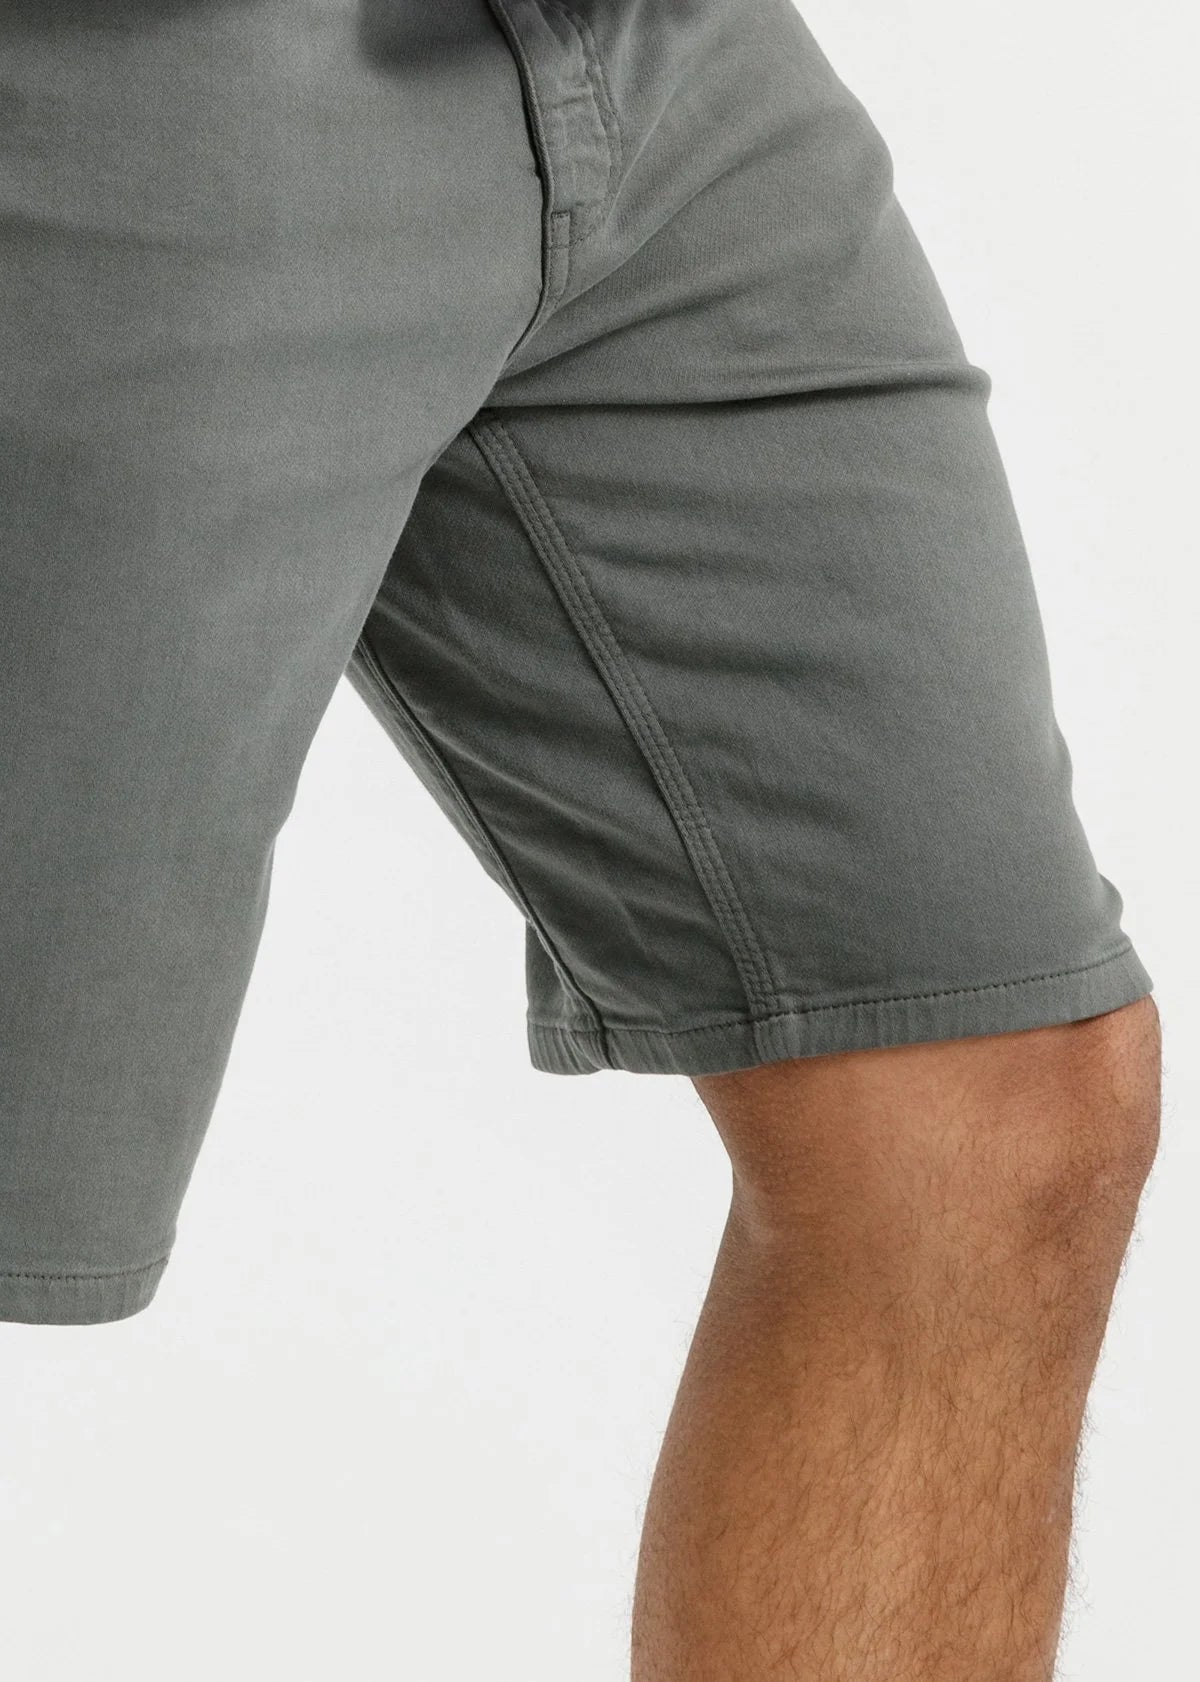 'Du/er No Sweat Shorts Relaxed' in 'Gull' colour